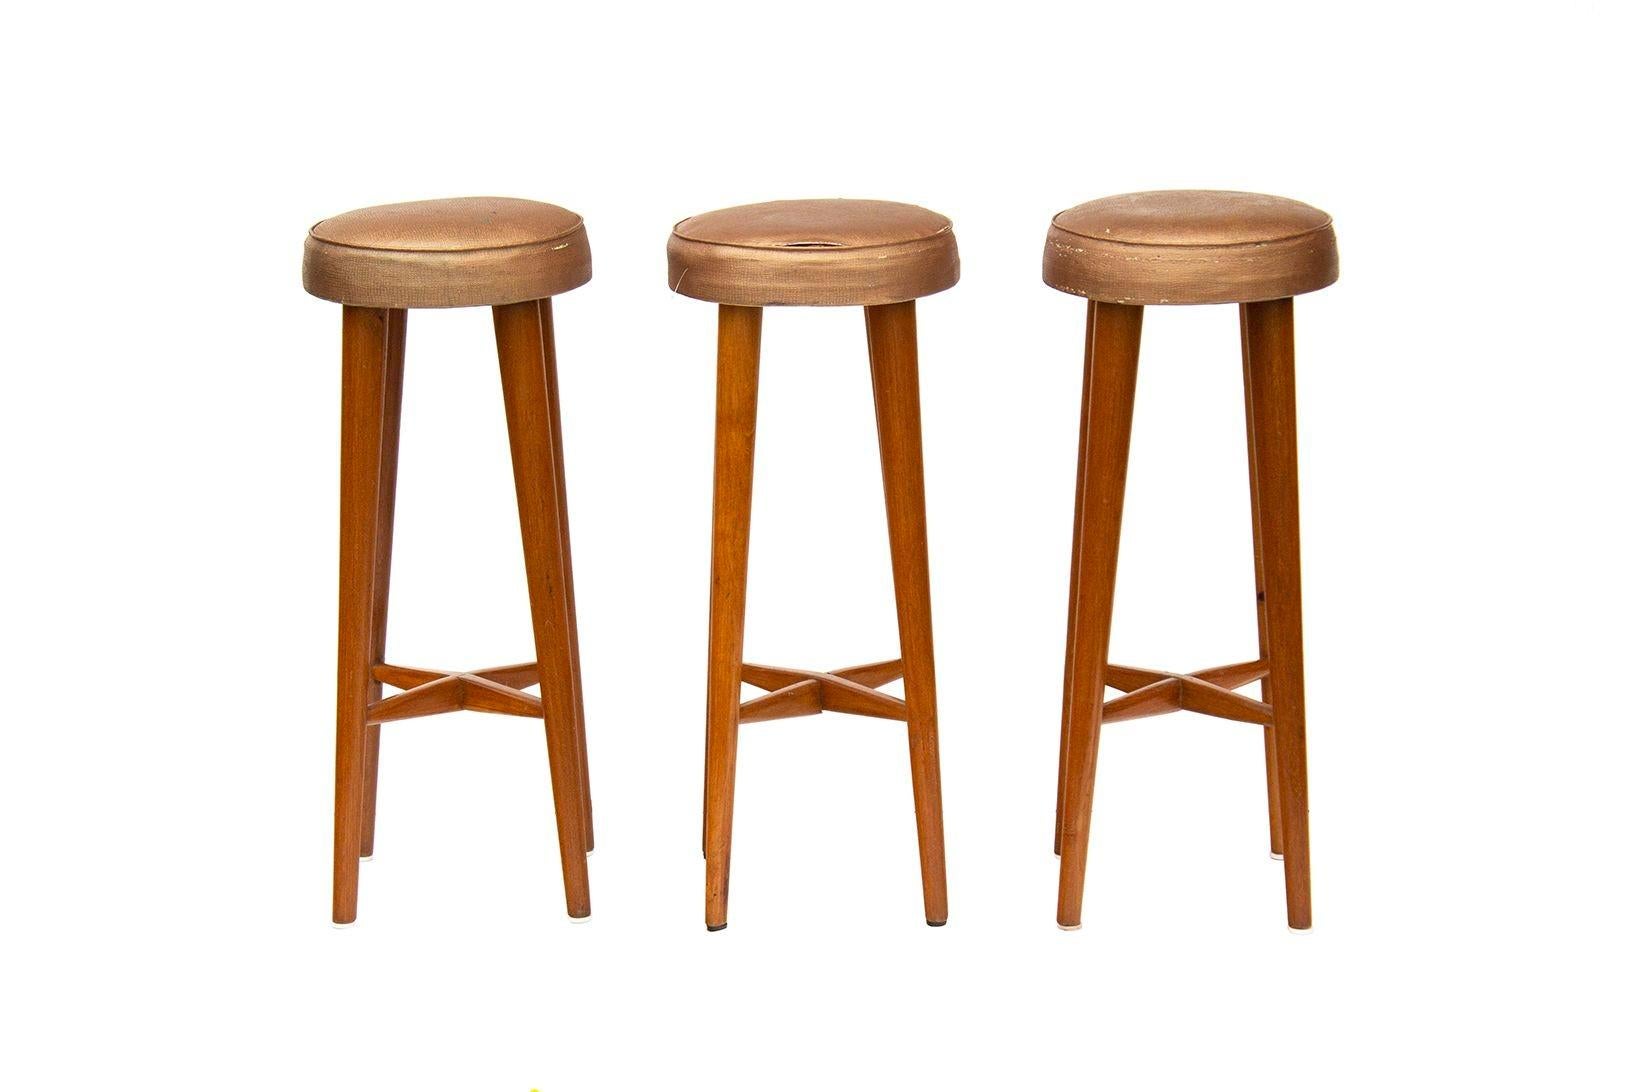 USA, 1950s
Set of handmade oak barstools in oak with X shaped stretcher supports. No maker's marks, believed to be handmade. These would be great reupholstered and would make great pieces for a photo shoot. Just the right golden look with hand to